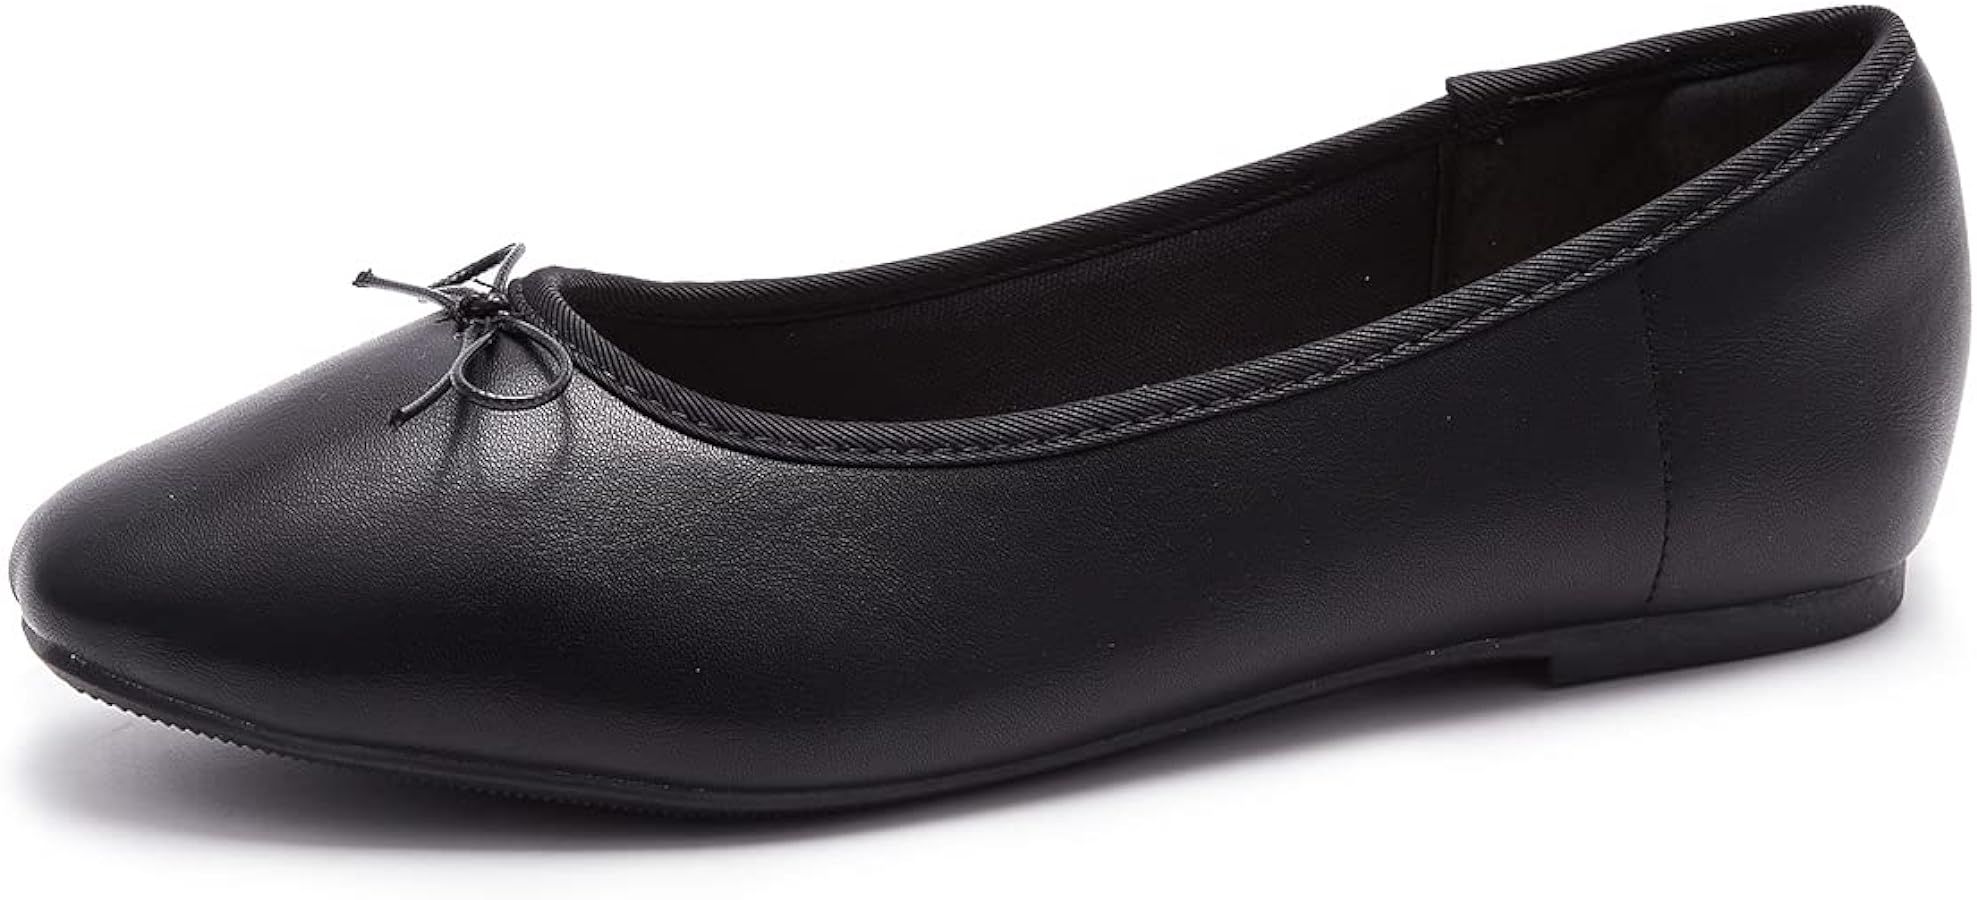 Women's Round Toe Ballet Flats Comfortable Bow Dressy Flats Shoes for Women | Amazon (US)